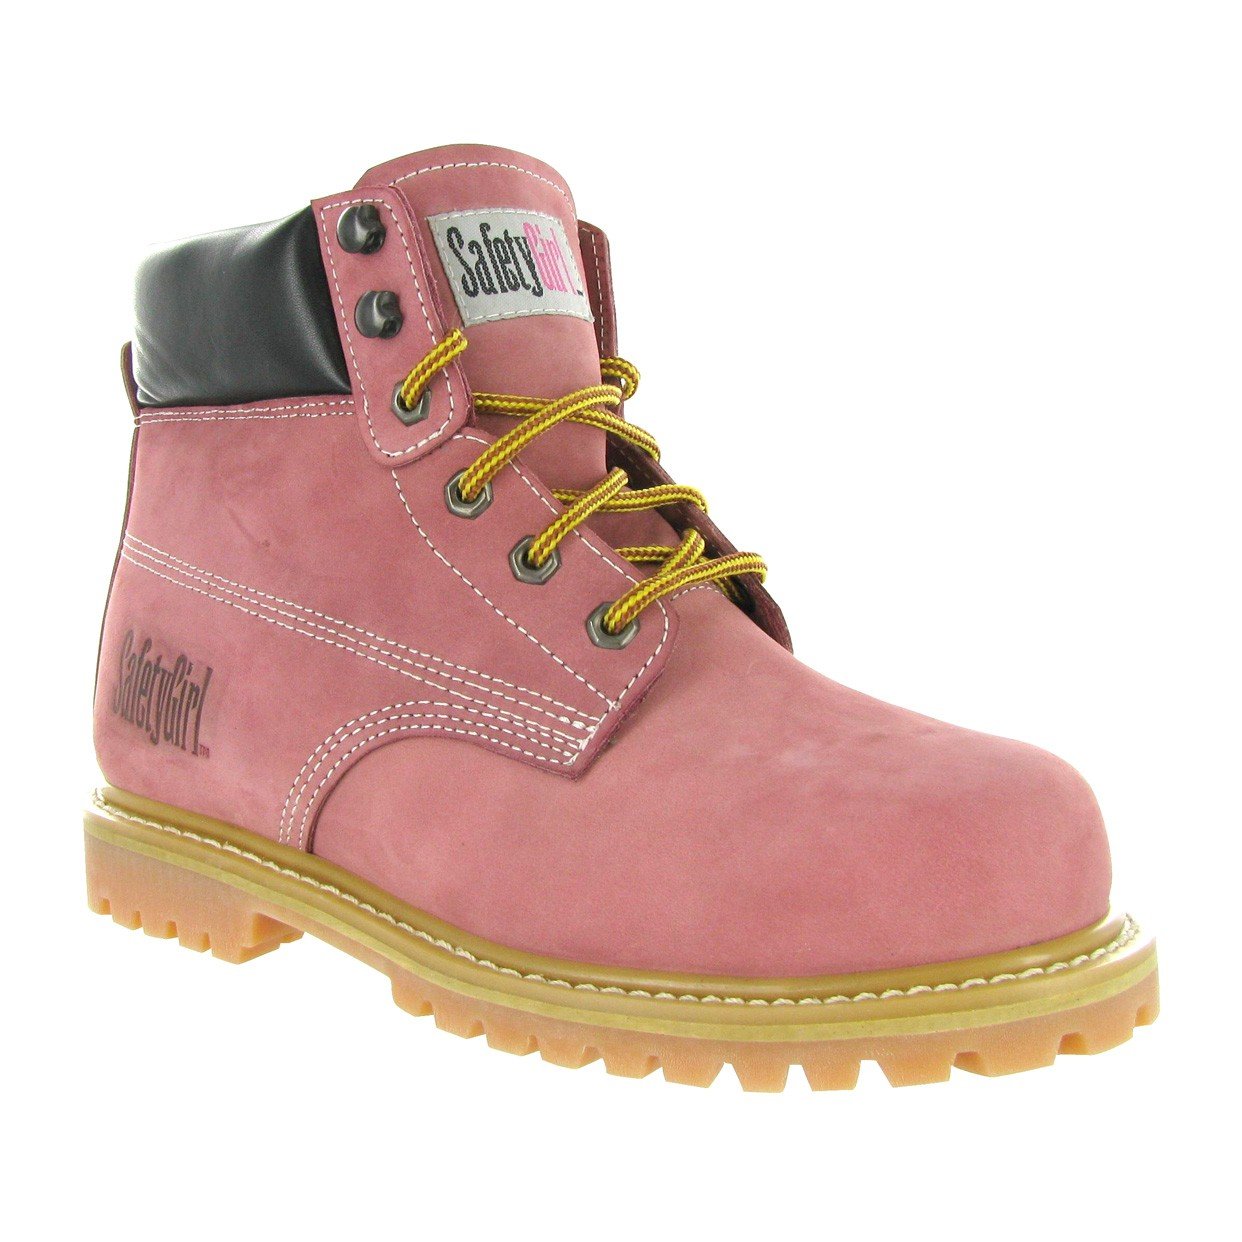 Safety Girl Water Resistant Women’s Steel Toe Work Boots